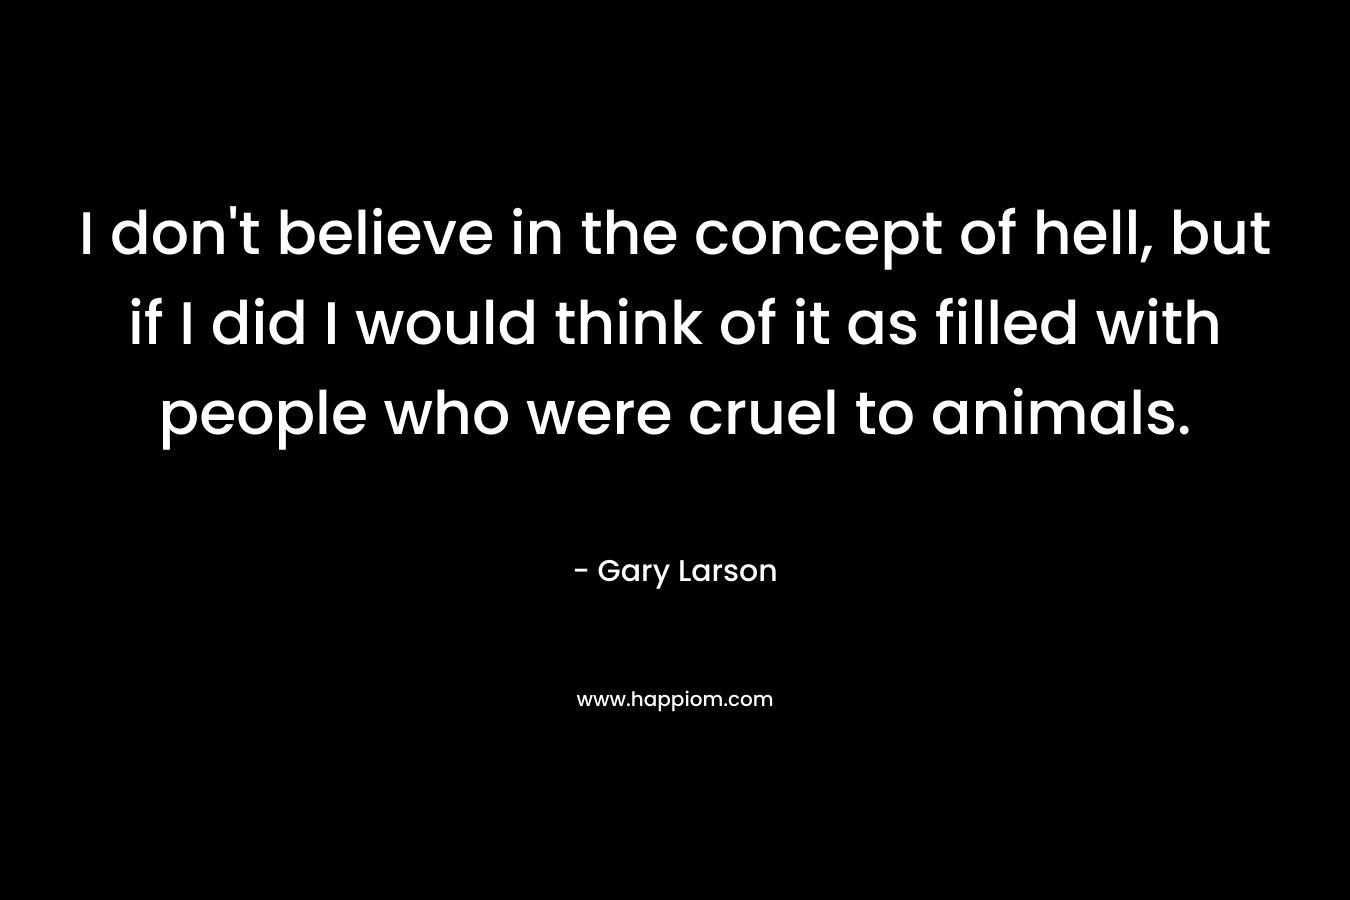 I don't believe in the concept of hell, but if I did I would think of it as filled with people who were cruel to animals.